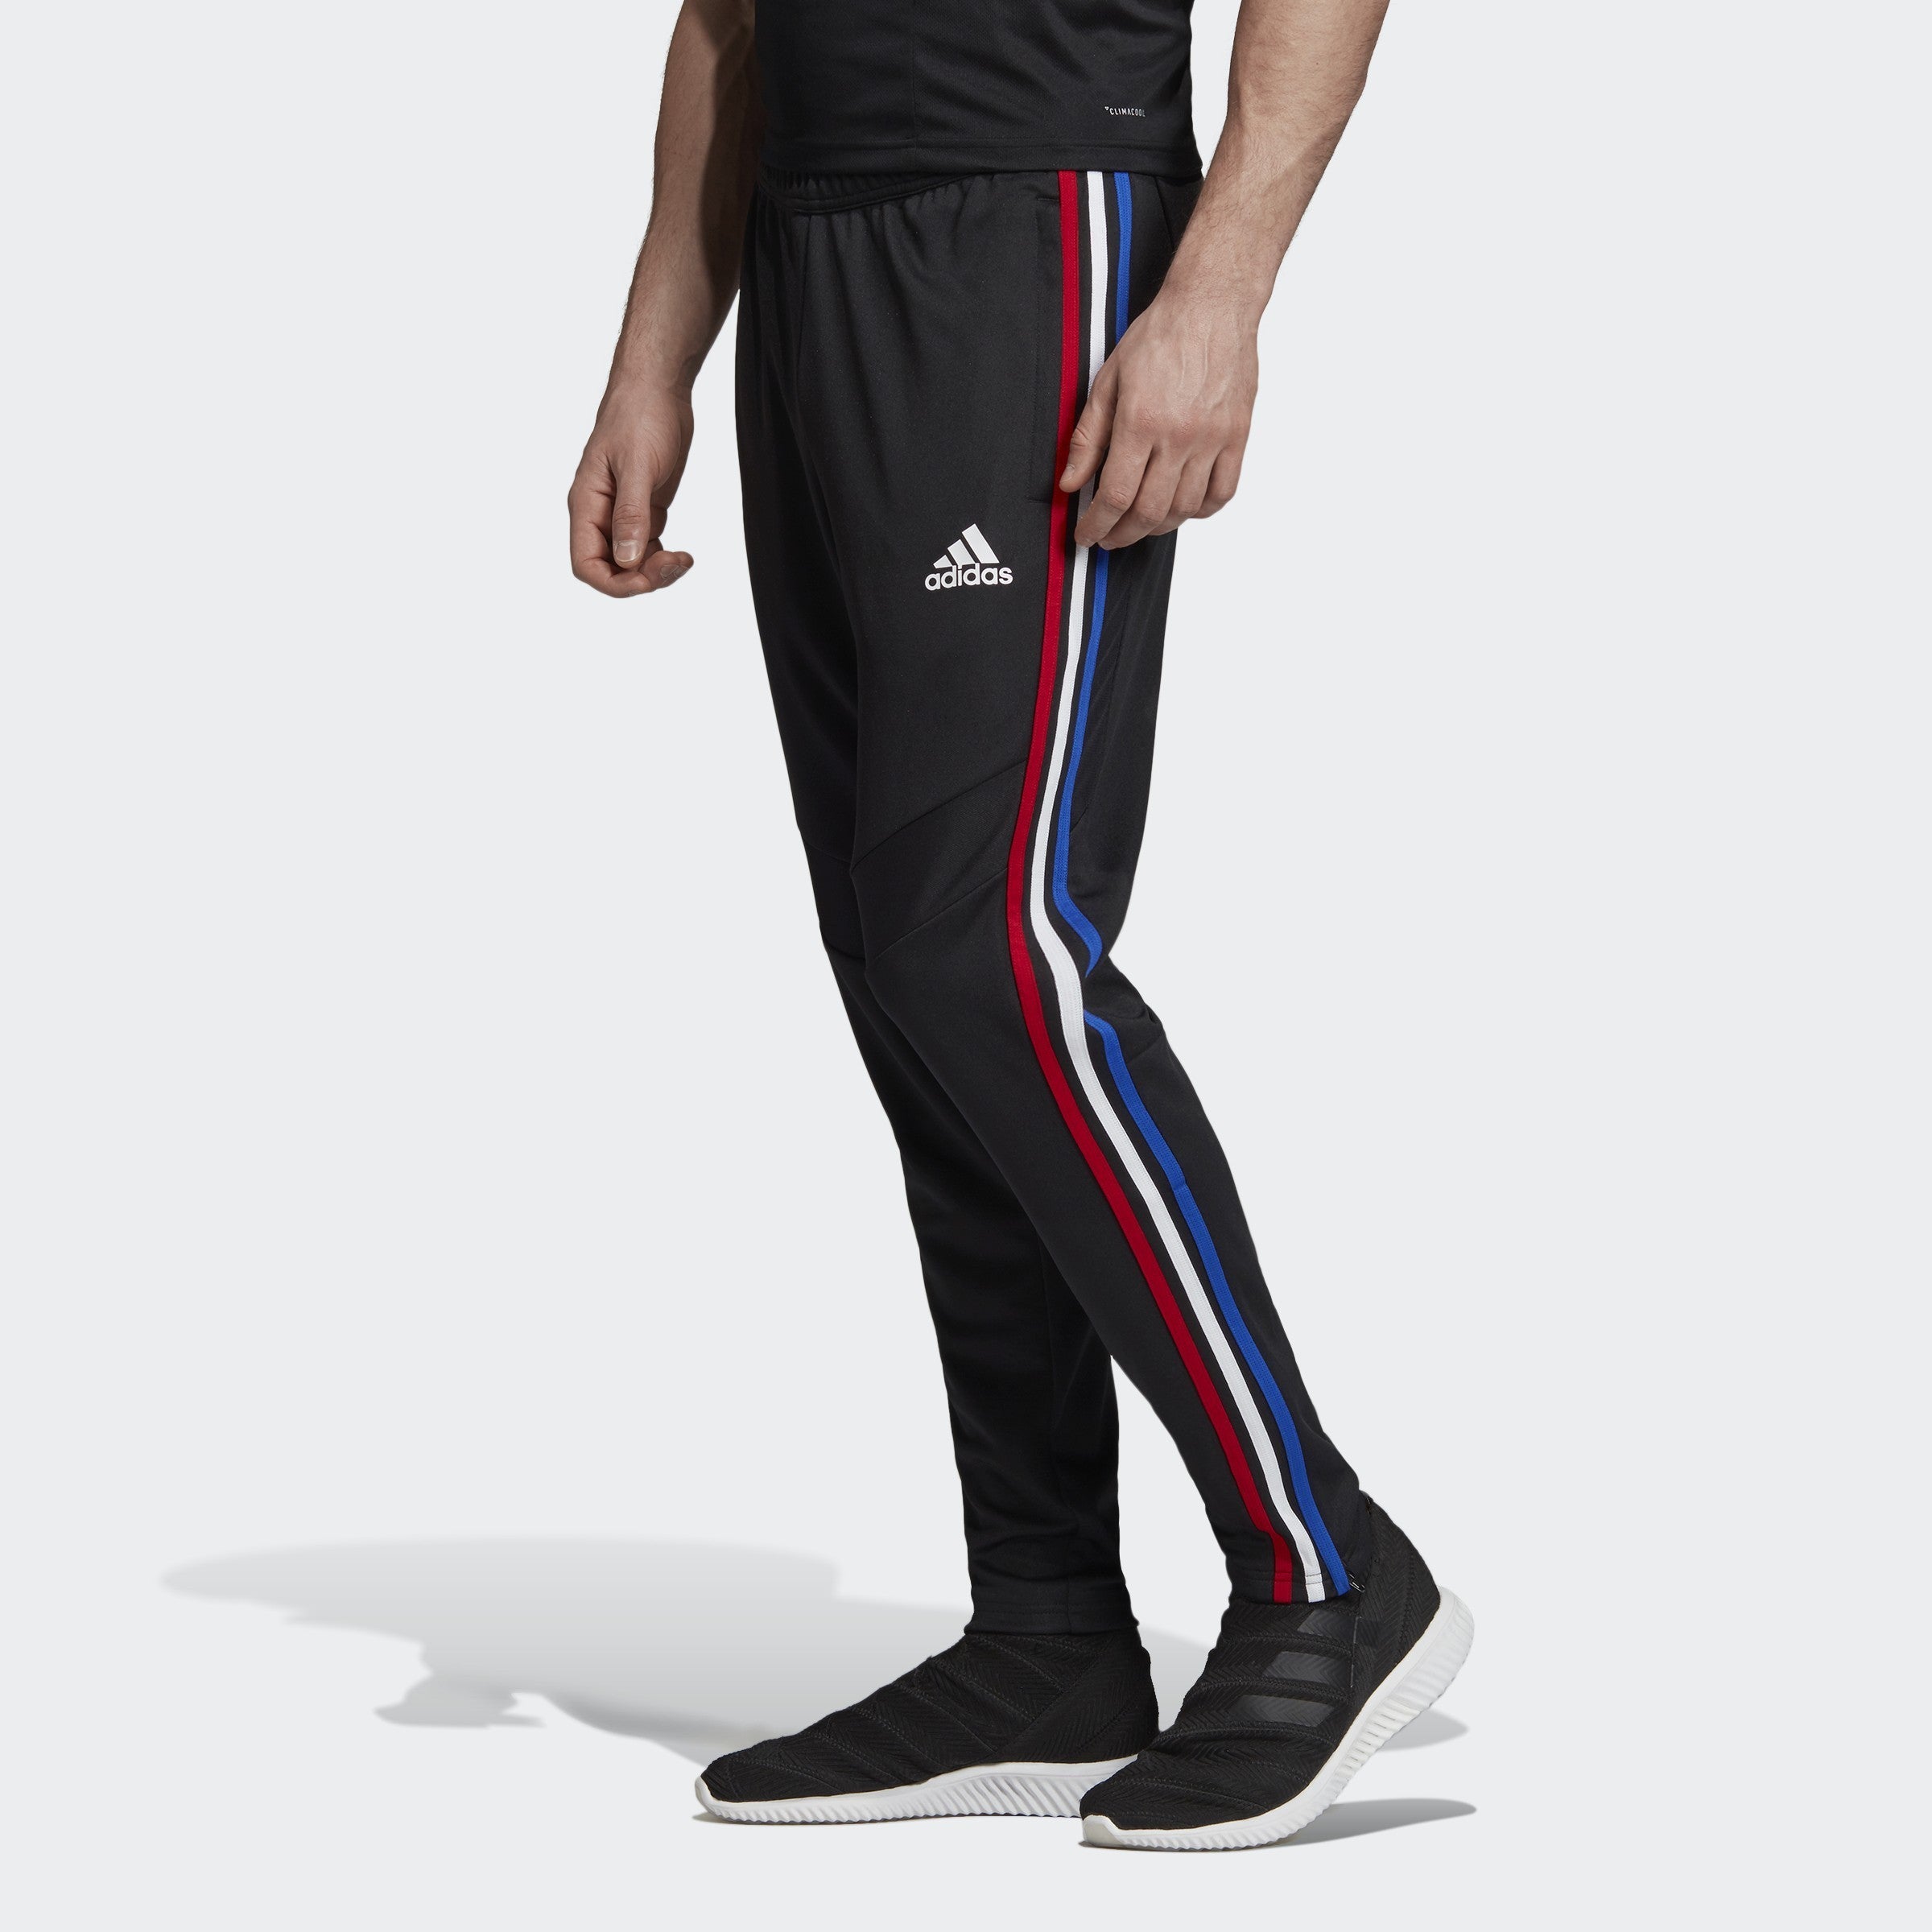 Adidas Climacool Track Pants REPRICED from 2000 LP POSTED Mens  Fashion Bottoms Joggers on Carousell